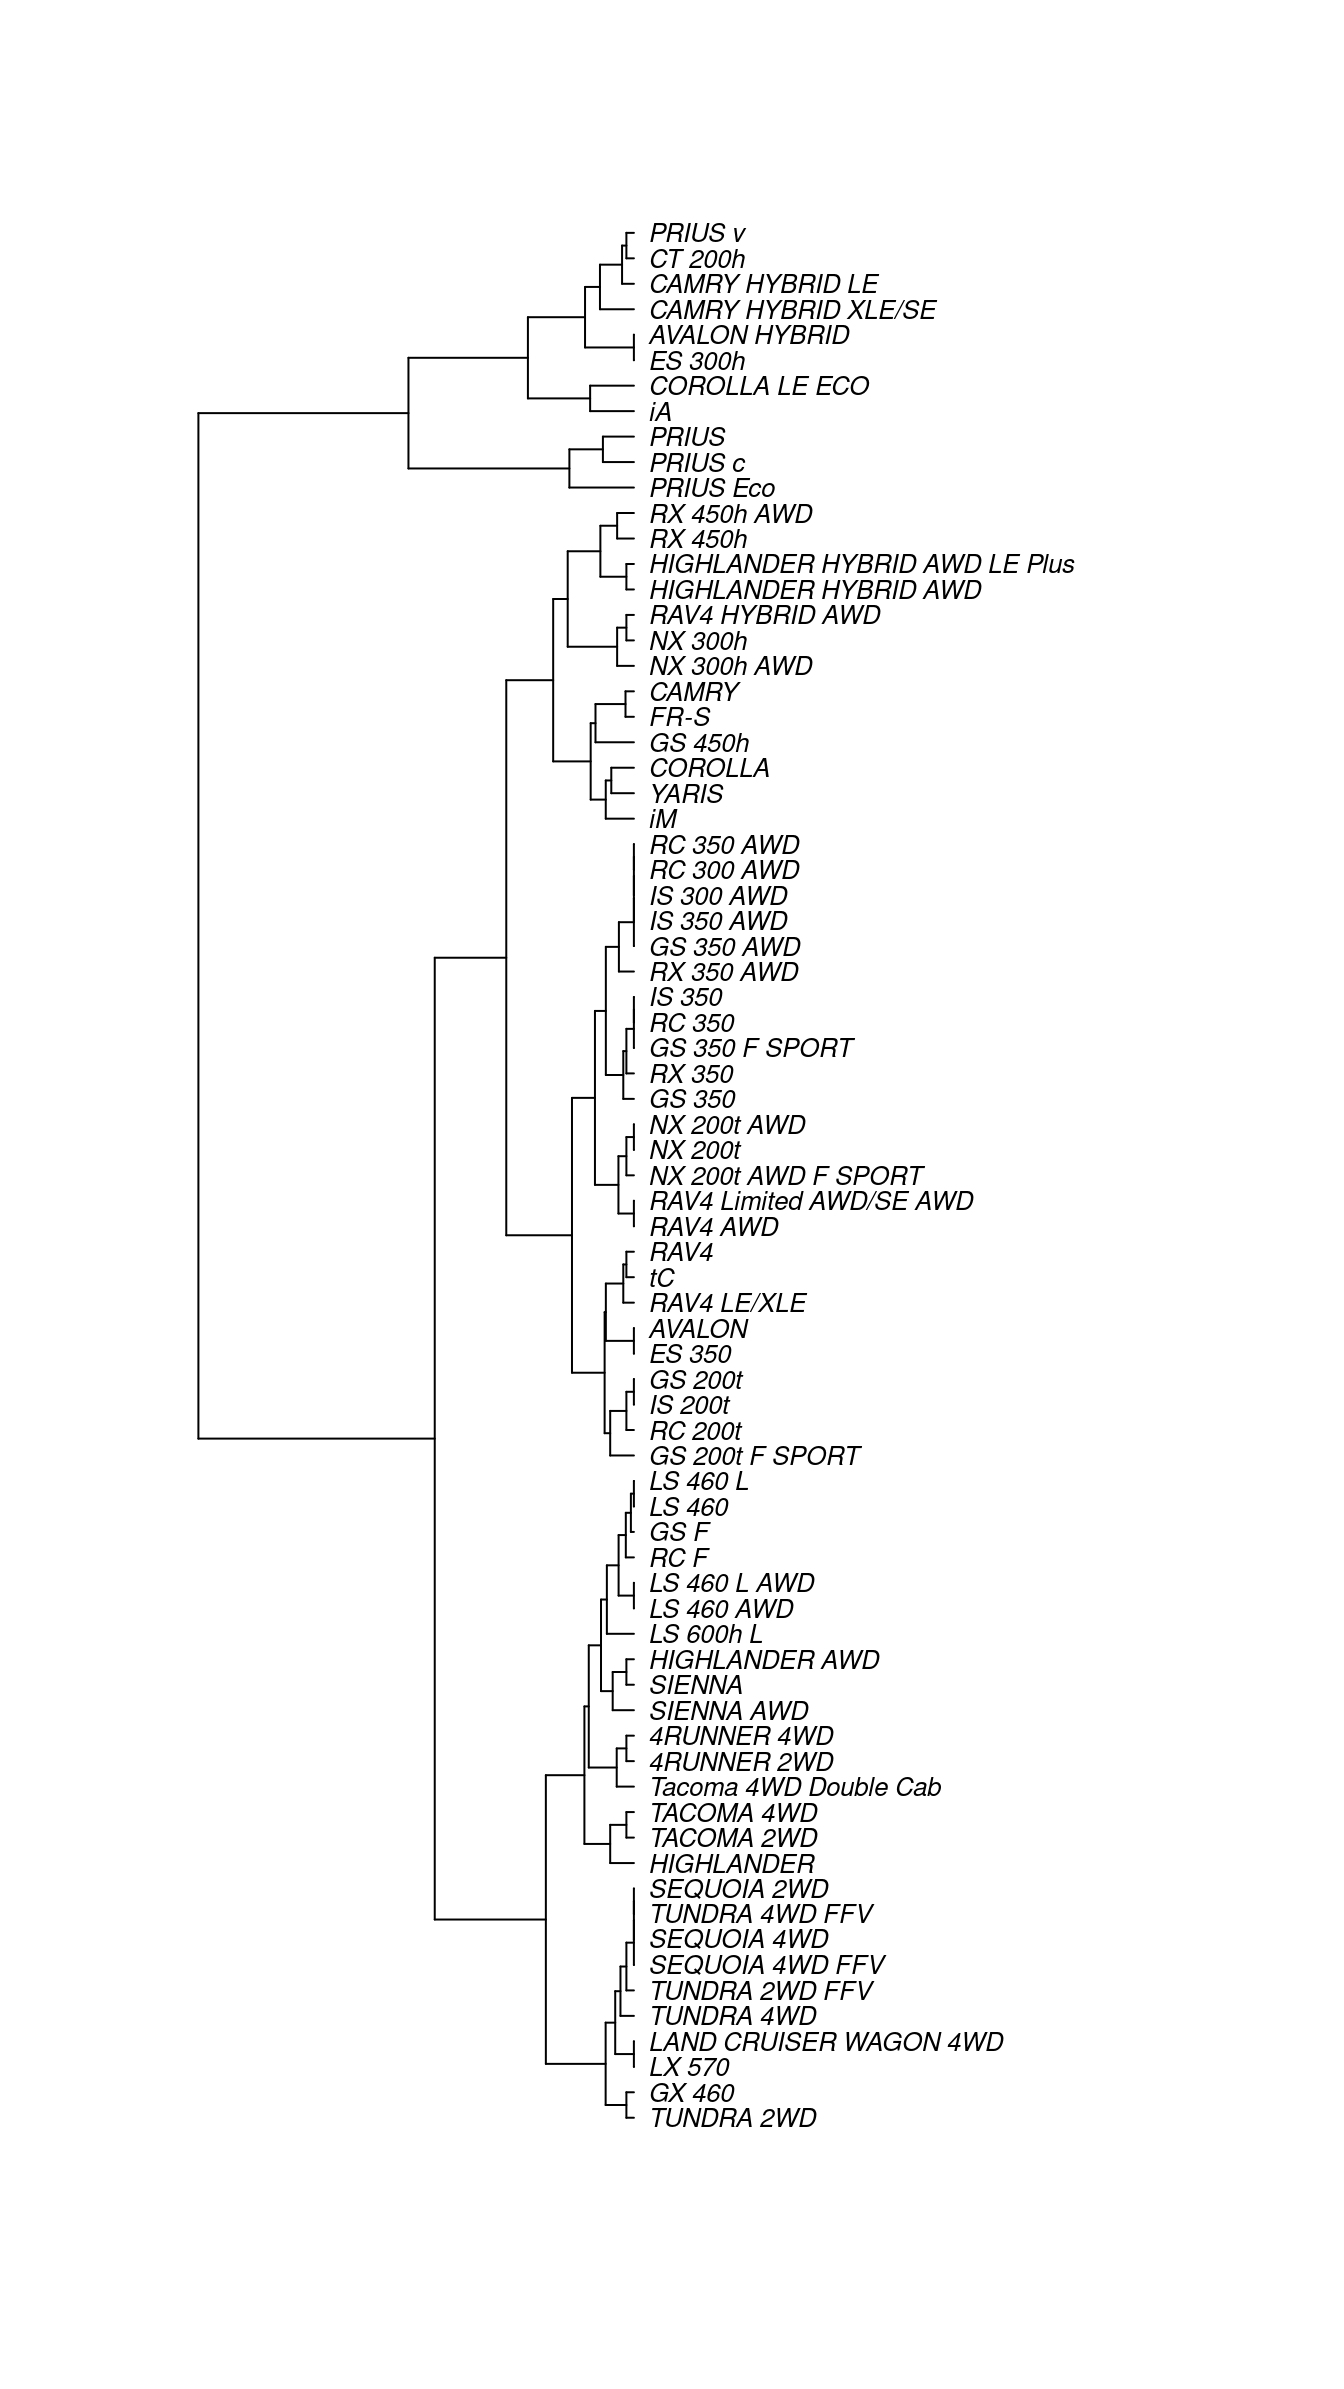 A dendrogram constructed by hierarchical clustering from car-to-car distances implied by the Toyota fuel economy data.